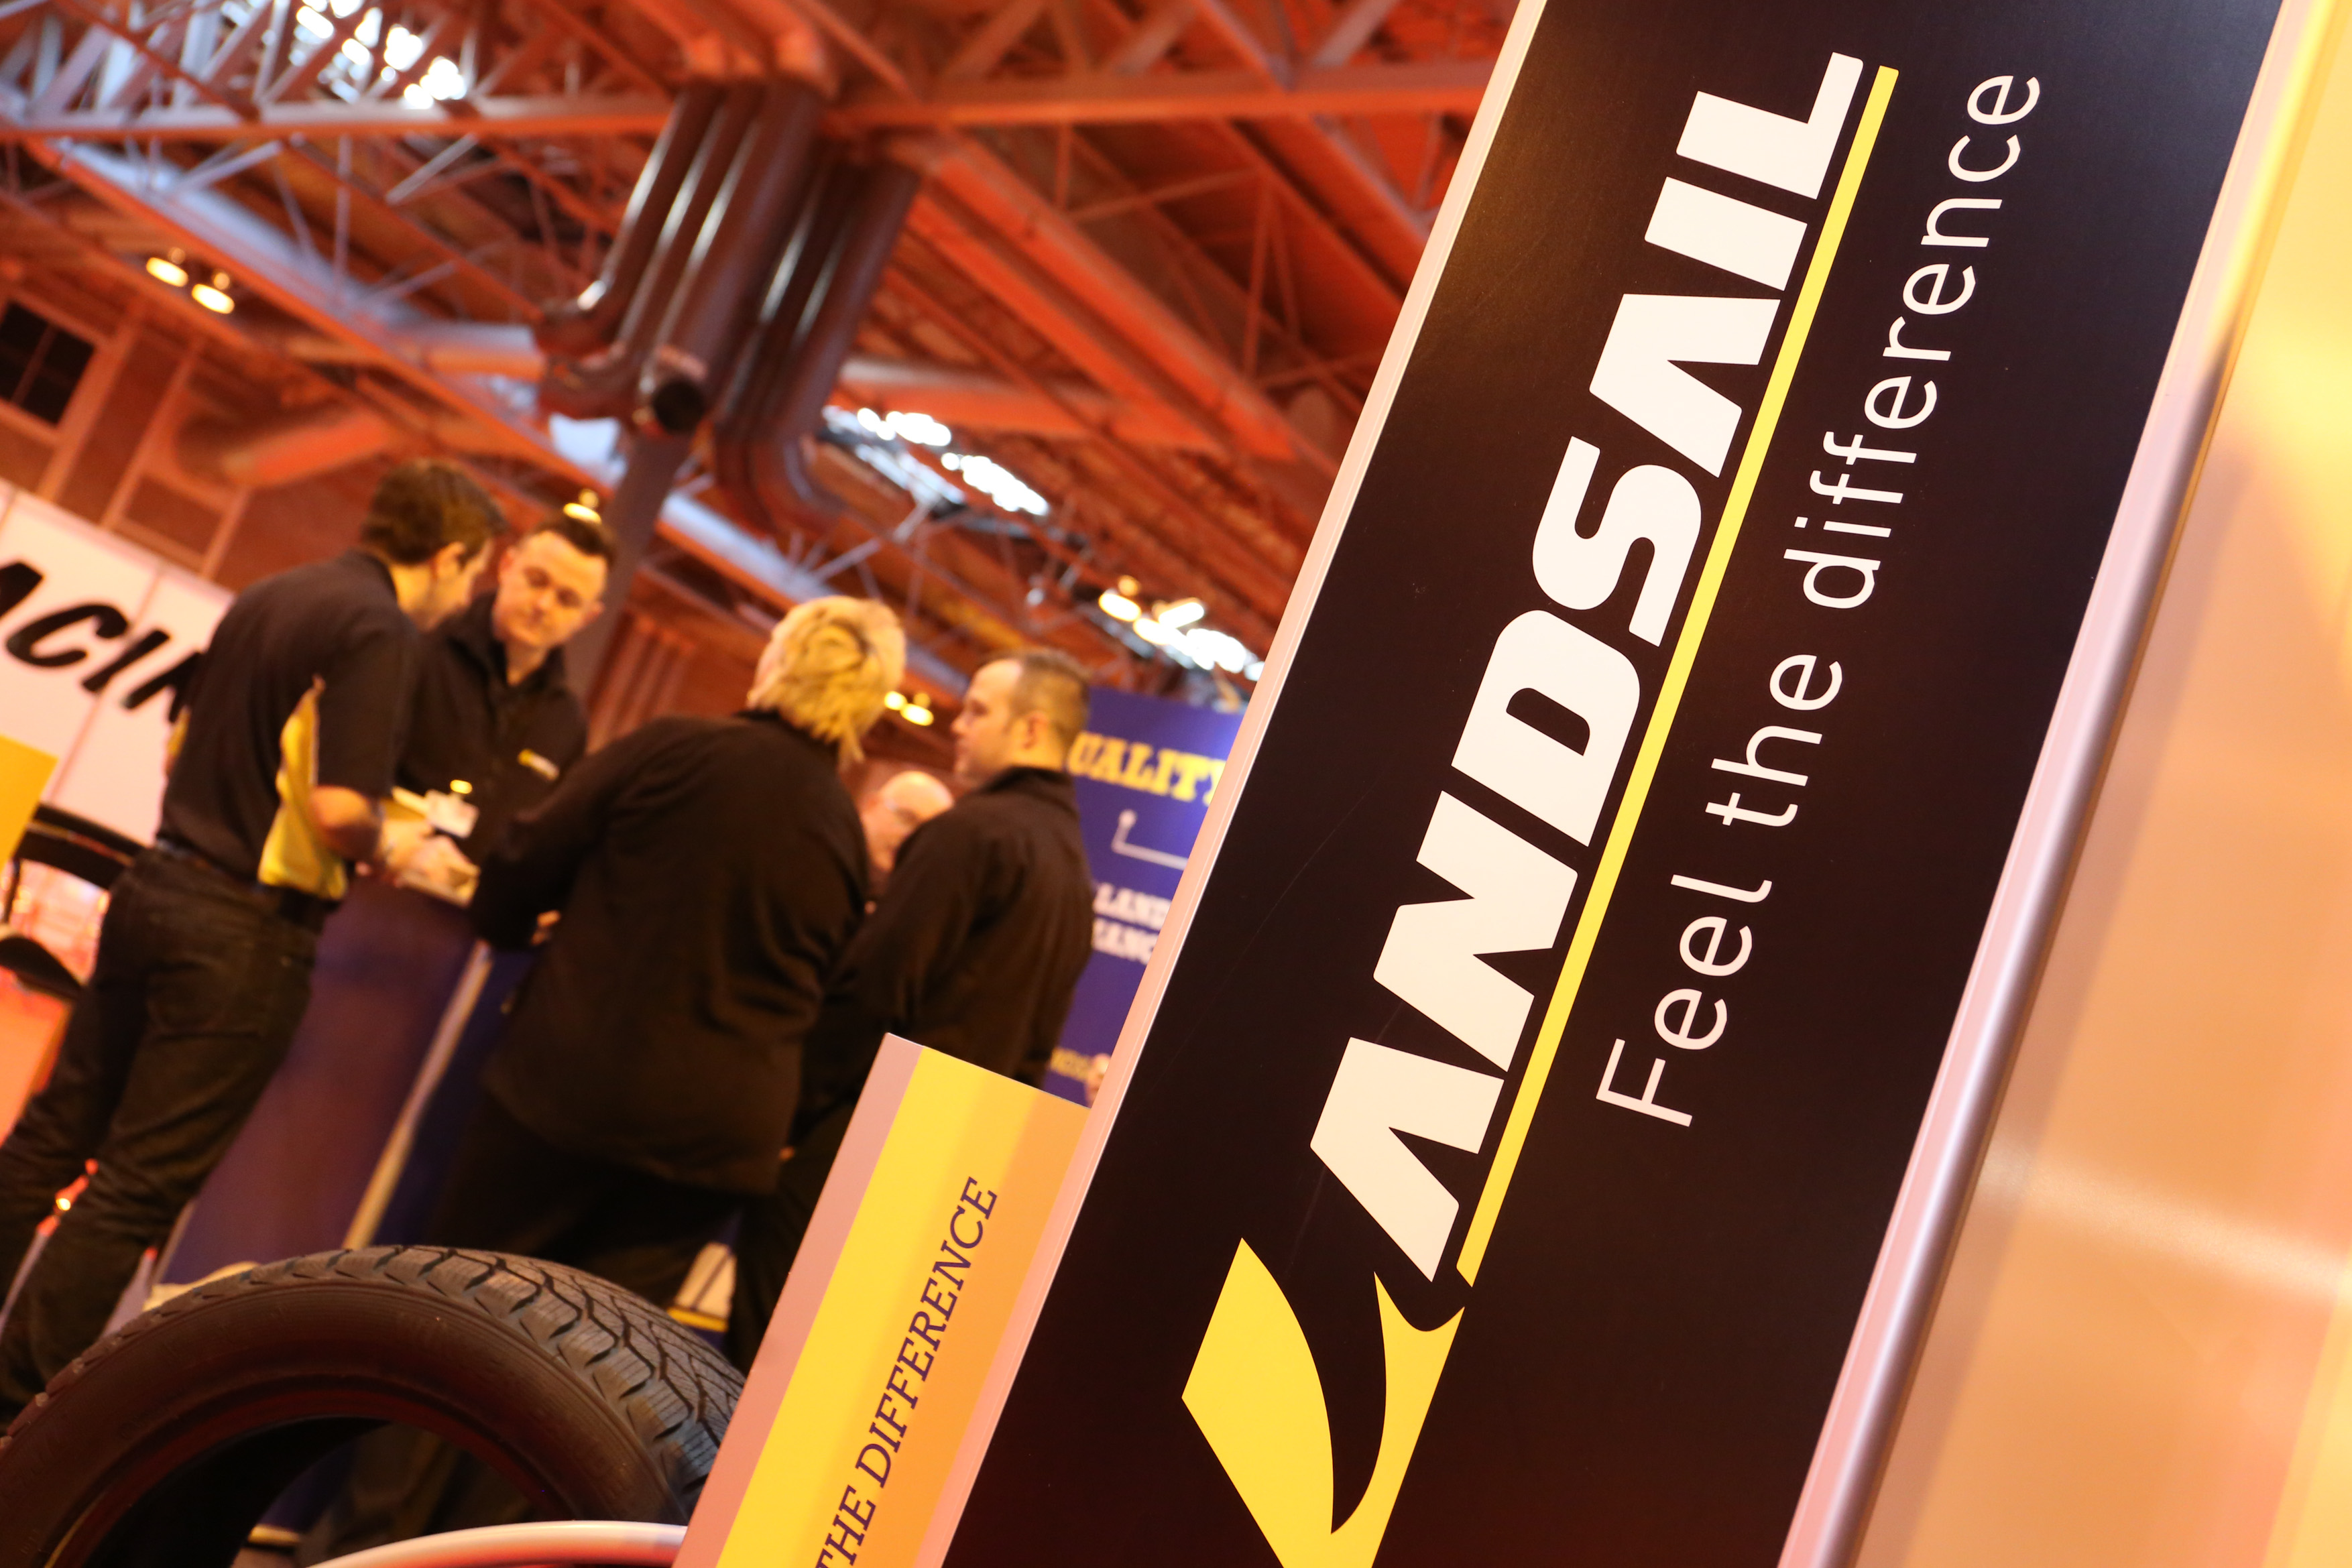 Landsail selling 1.5 million tyres a year via Grouptyre